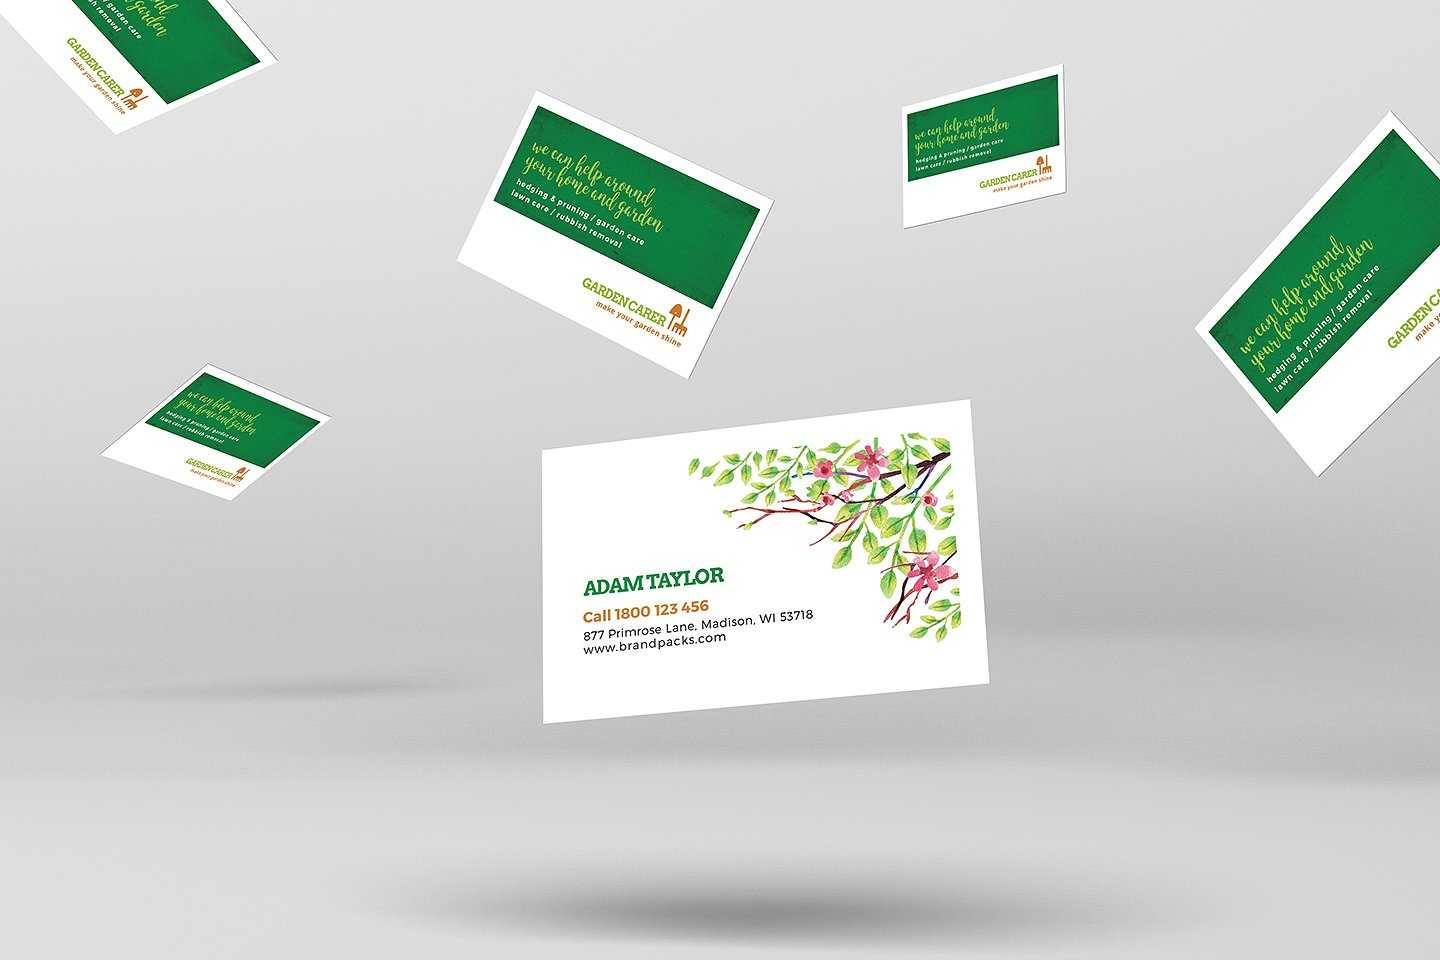 12+ Business Card Designs For Landscapers | Design Trends Throughout Gardening Business Cards Templates